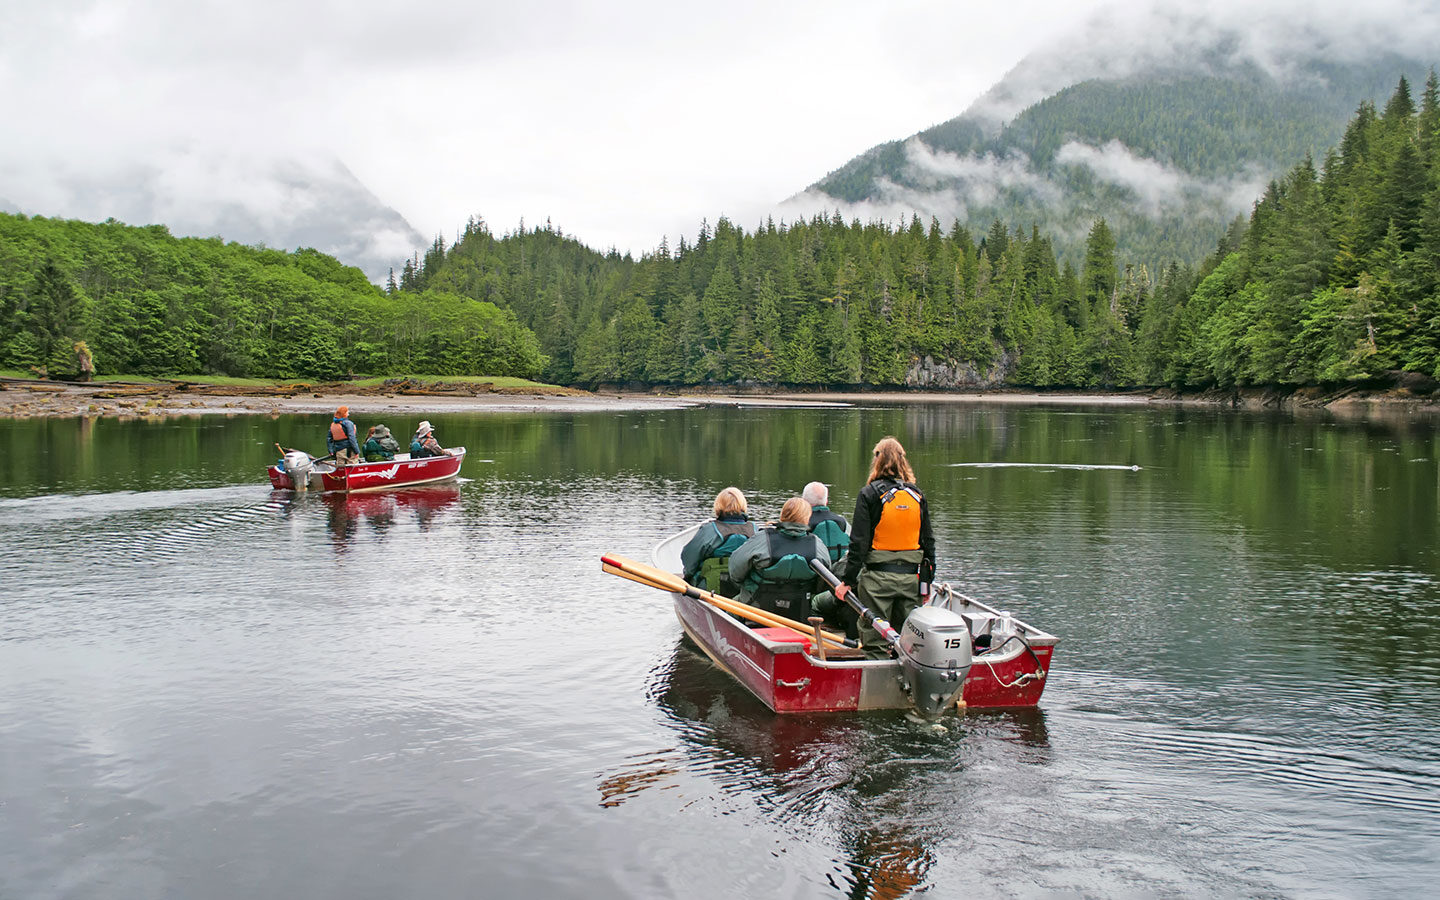 Exploring the Great Bear Rainforest in Canada by boat from an eco-lodge